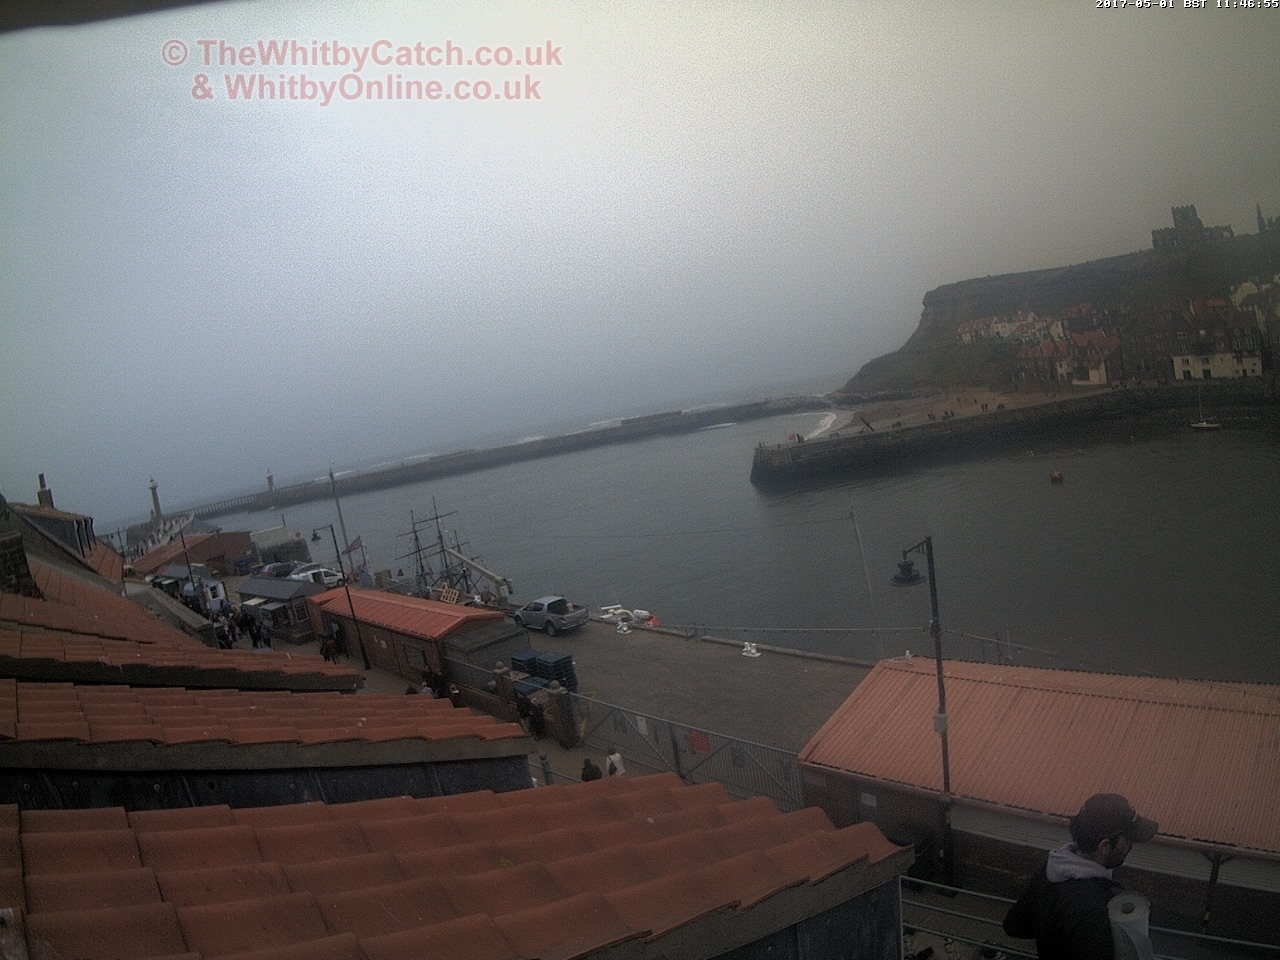 Whitby Mon 1st May 2017 11:47.